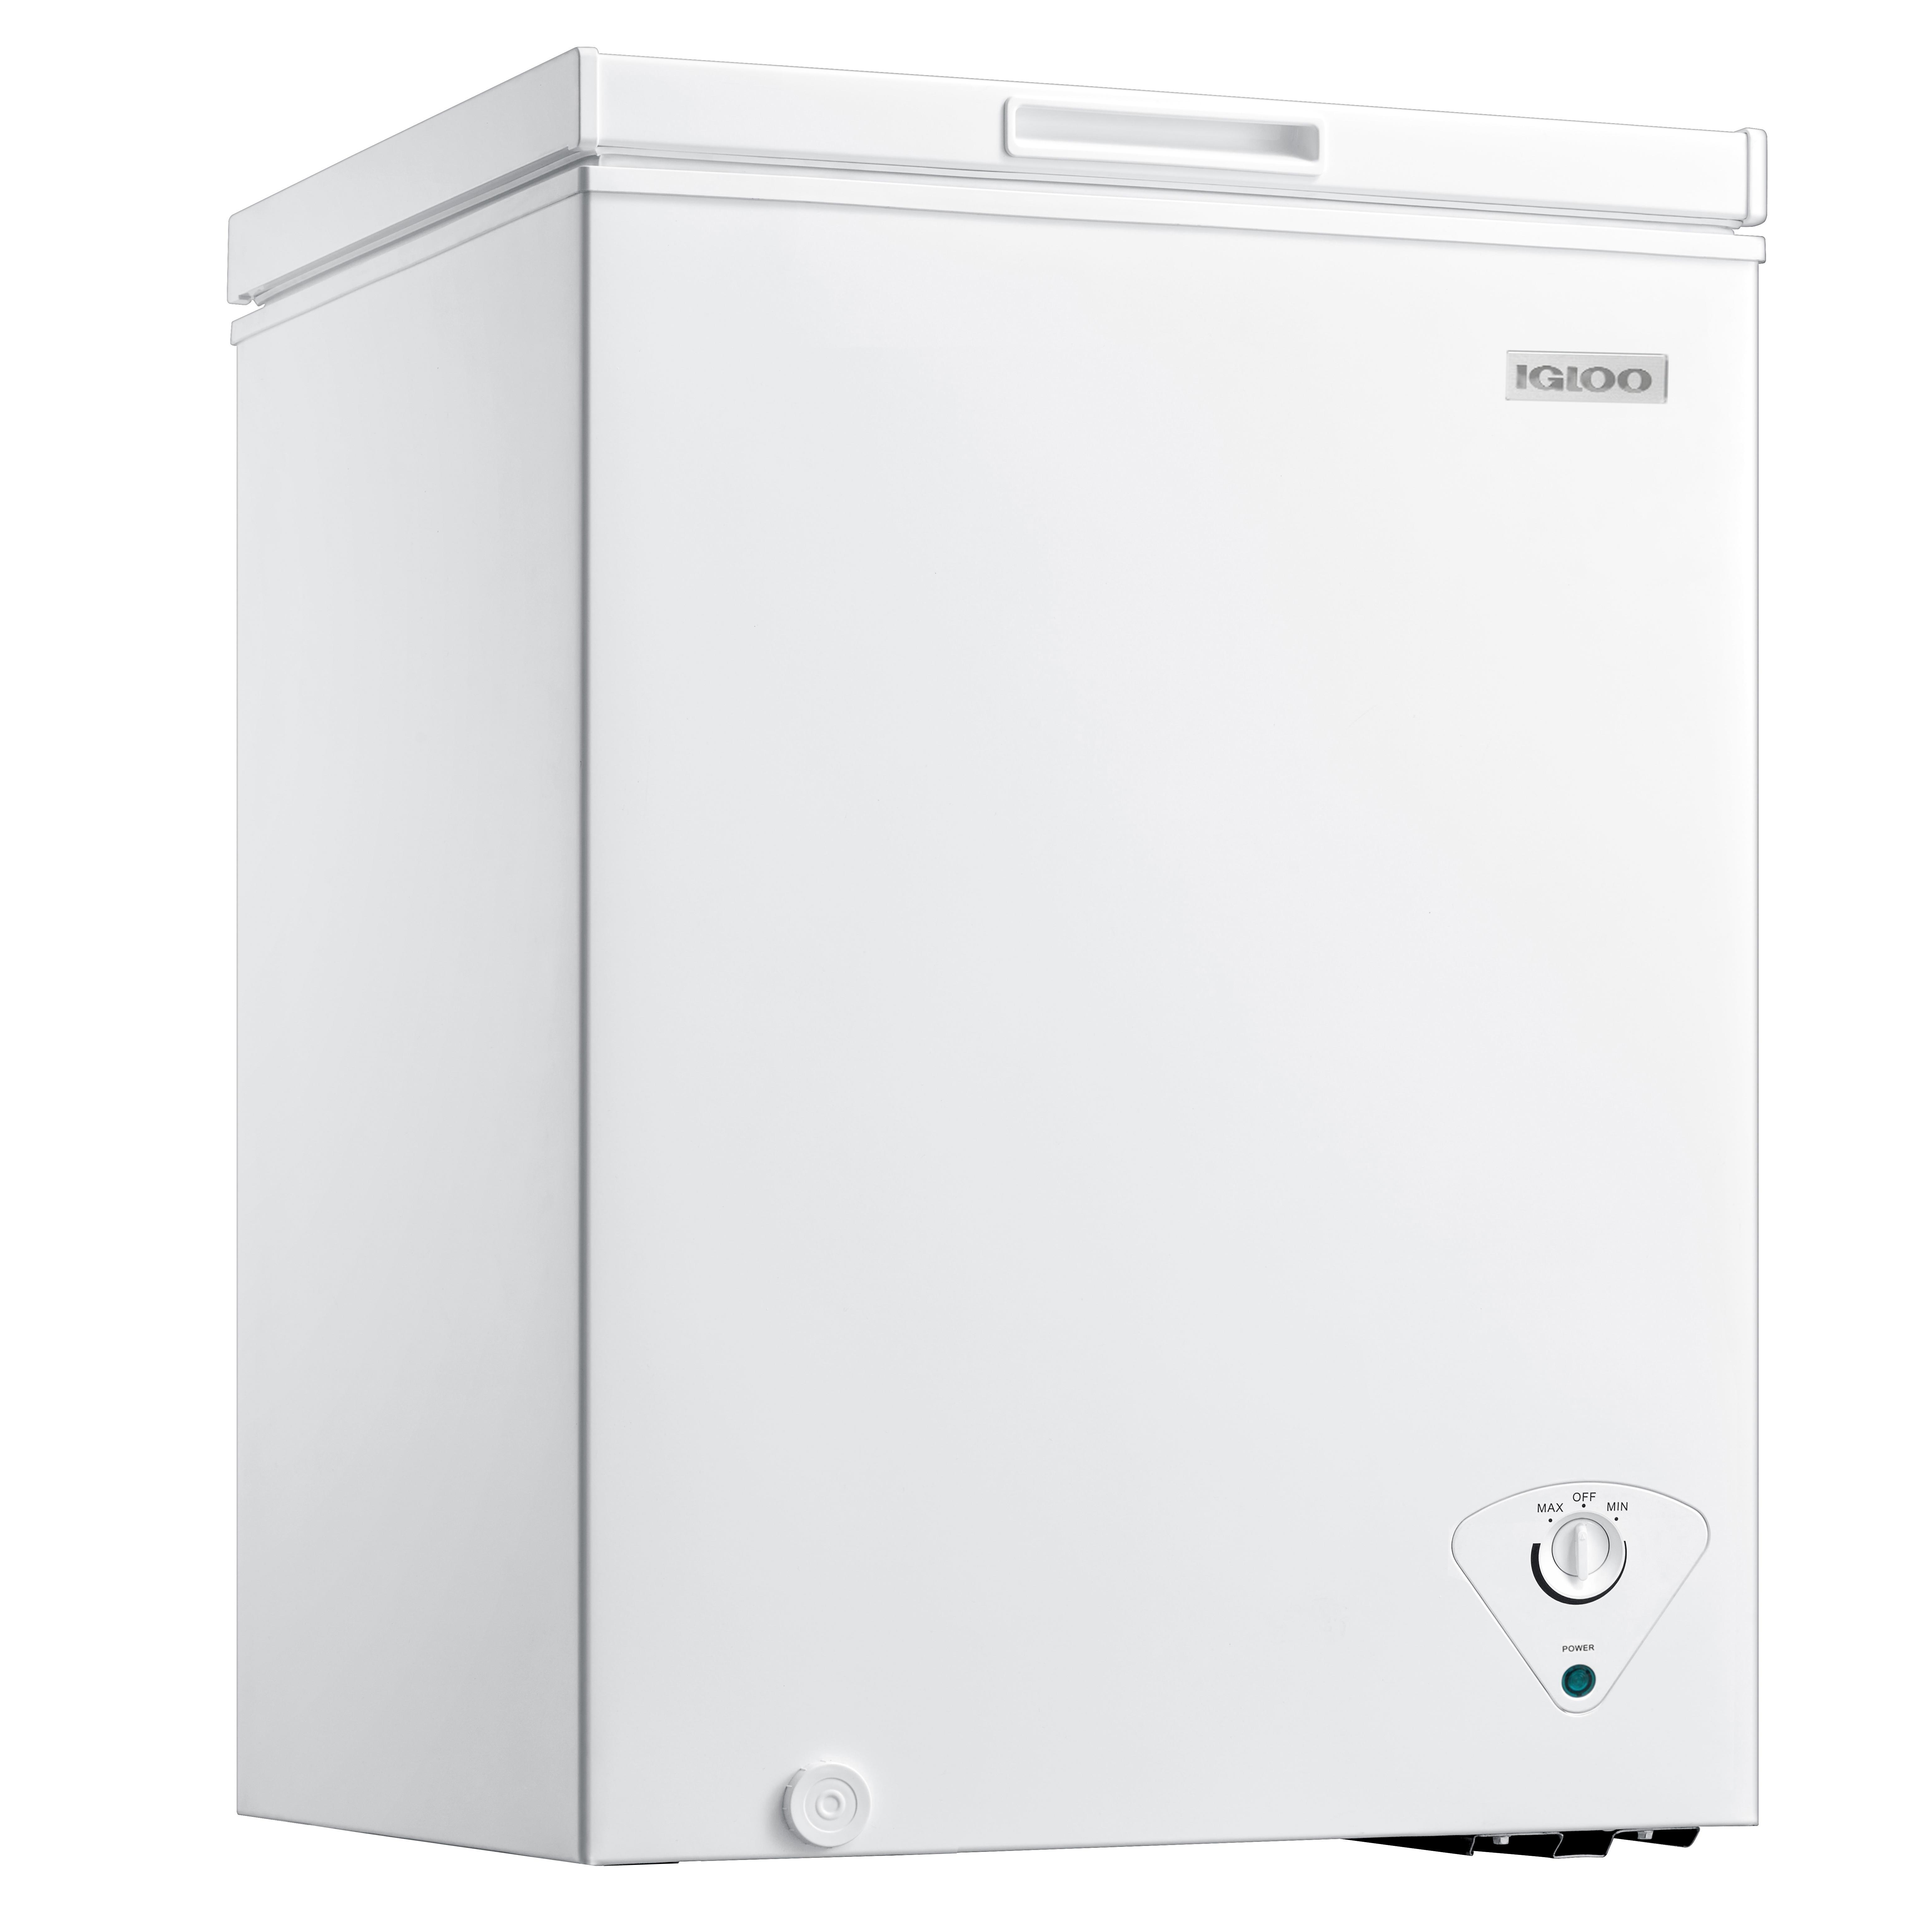 Igloo 3.5 Cu Ft Chest Freezer with Removable Basket and Front Defrost Water Drain